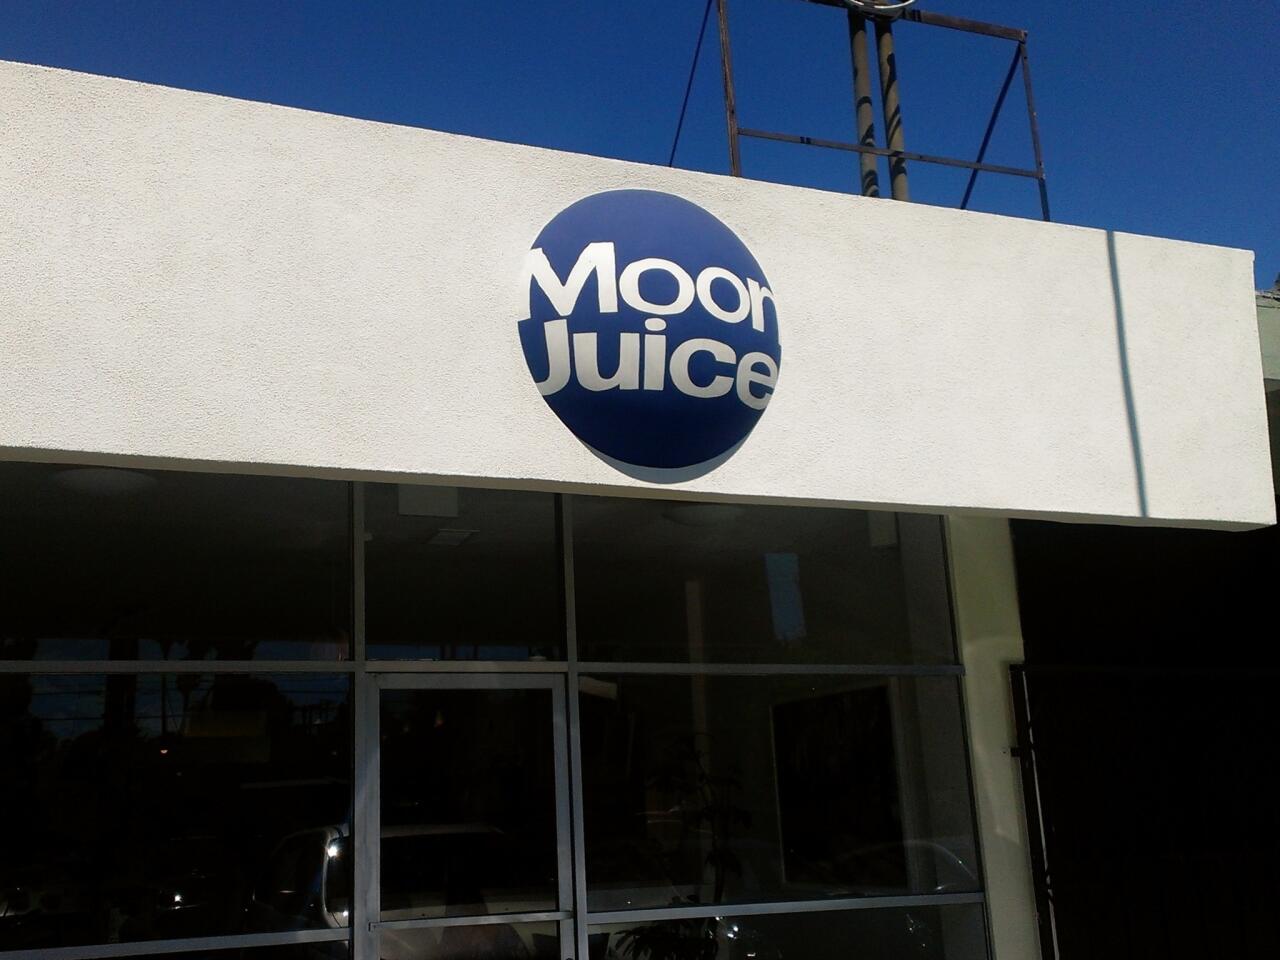 Moon Juice, the second location of the growing cold-pressed juice bar, is set to open this weekend.